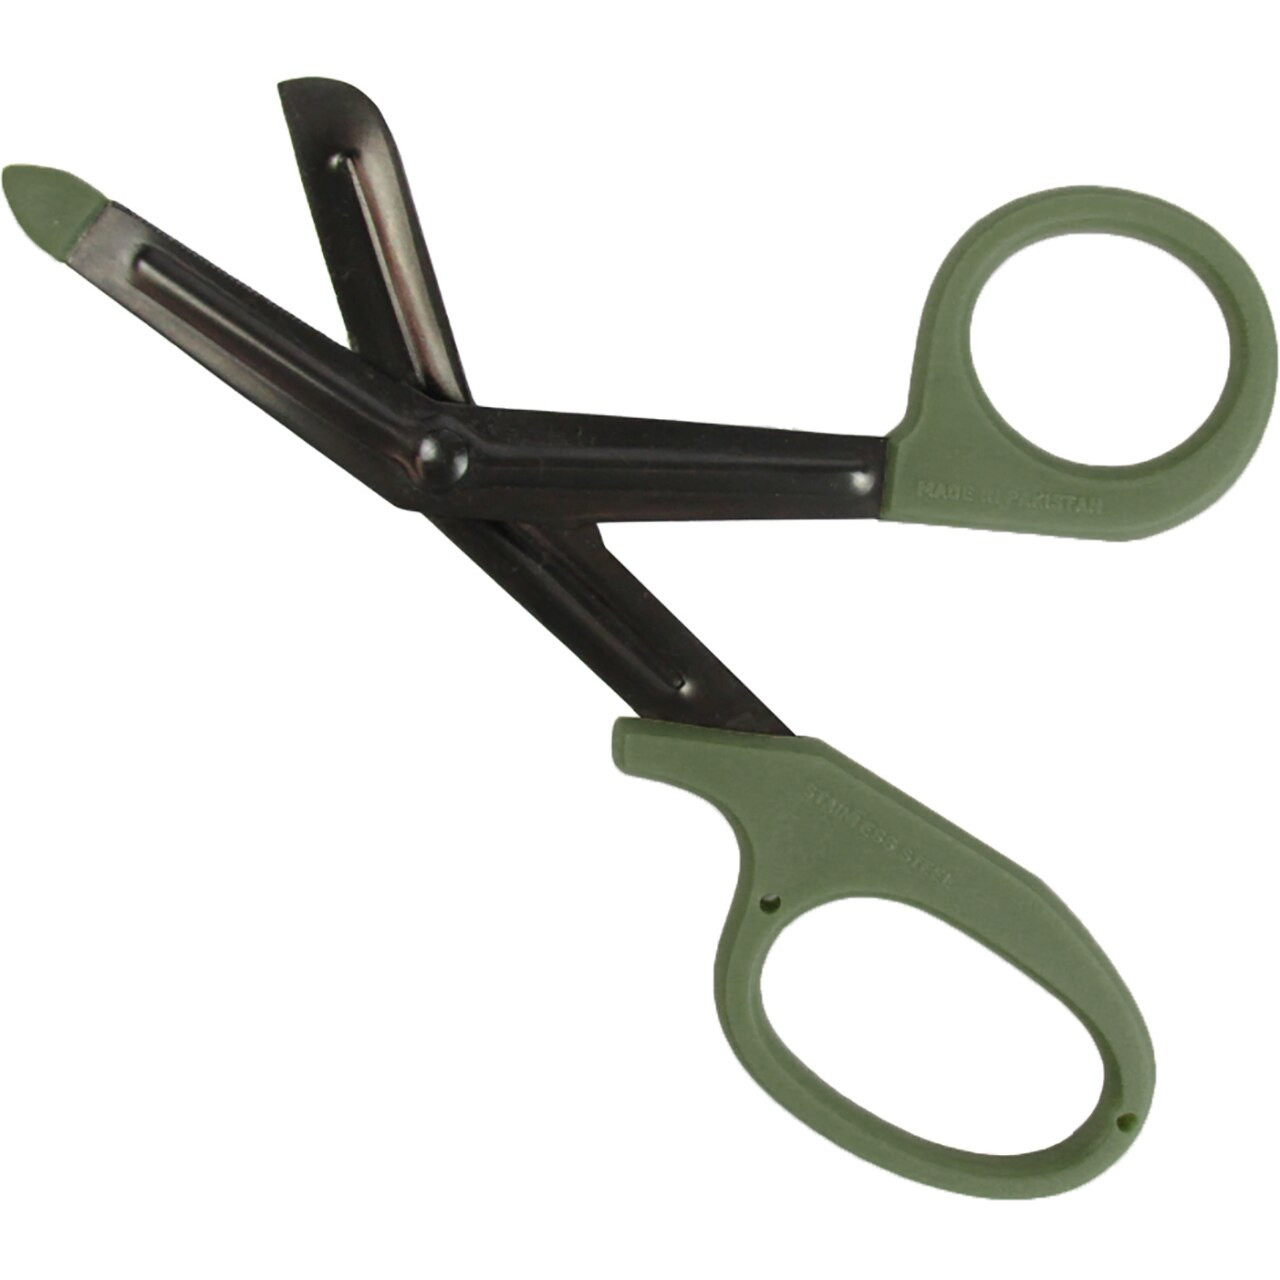 https://cdn11.bigcommerce.com/s-rd4j7/images/stencil/1280x1280/products/3202/13083/50-0702-OD-Green-Shears-7.5in-1__56419.1607031323.1280.1280__26930.1613143135.jpg?c=2